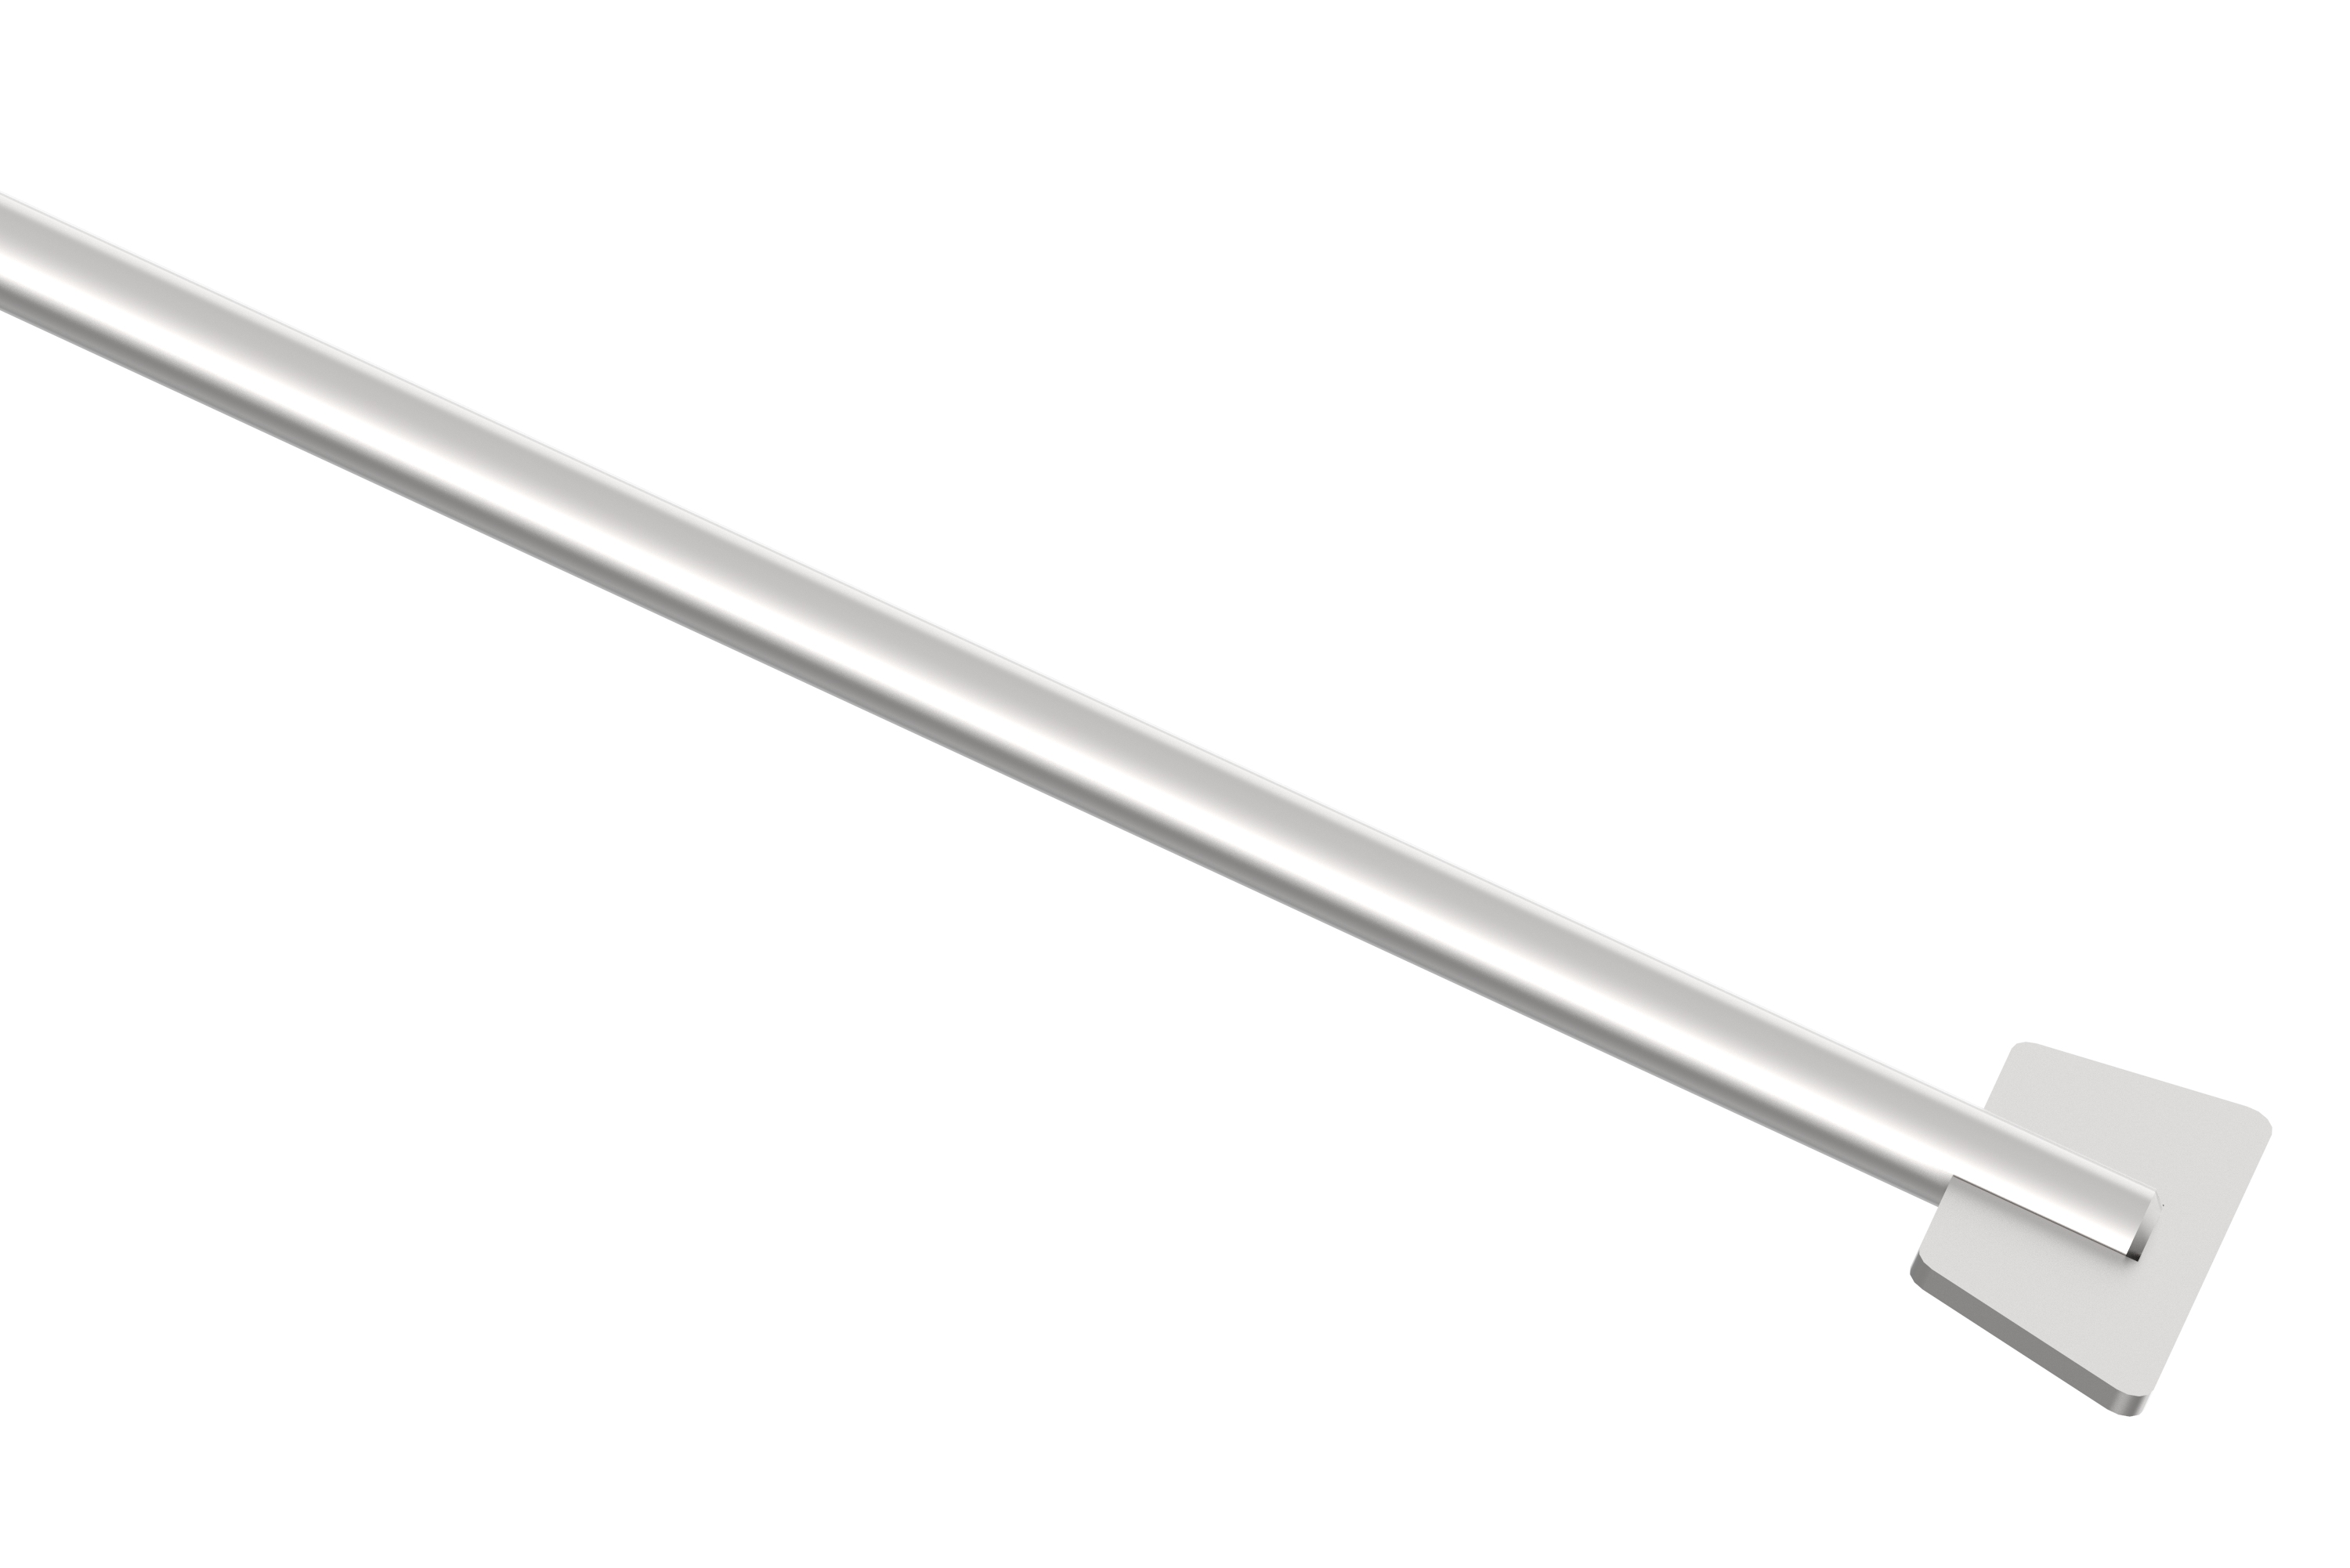 Laboratory paddle stirrer made out of stainless steel